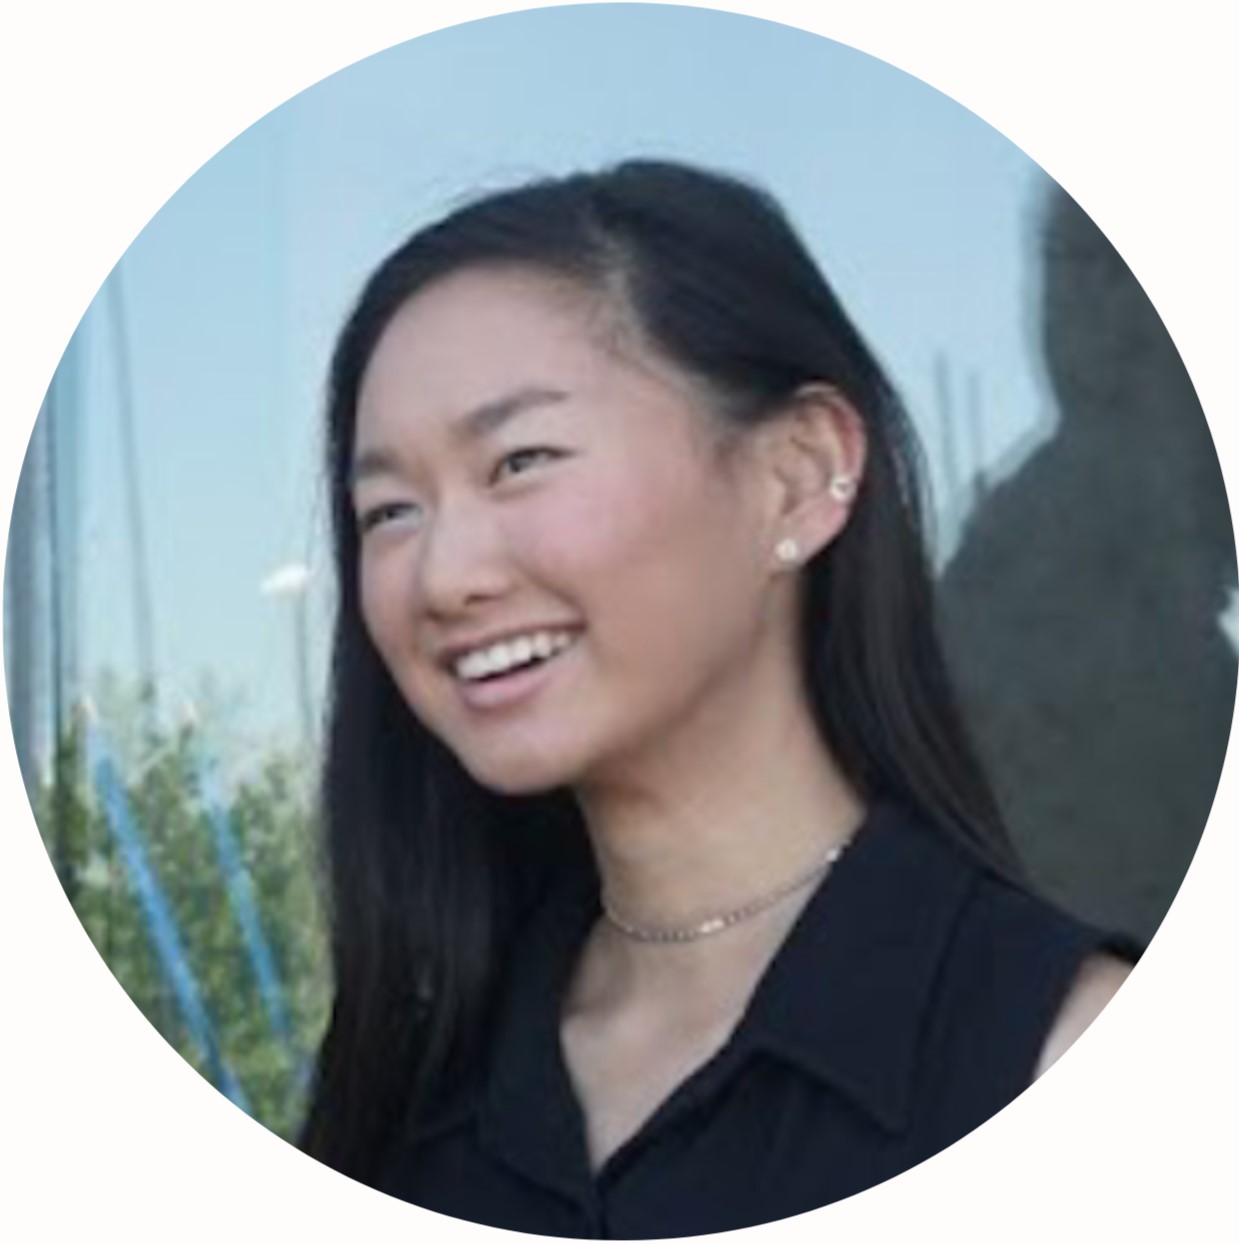 sophia chen. when hovering over the picture, the following bio appears: 
							'sophia is class of 2023 at mit double majoring in mechanical engineering and art & design. 
							she’s interested in user-centered product design and humanitarian innovation. 
							she loves wearing sweaters and funky socks!'